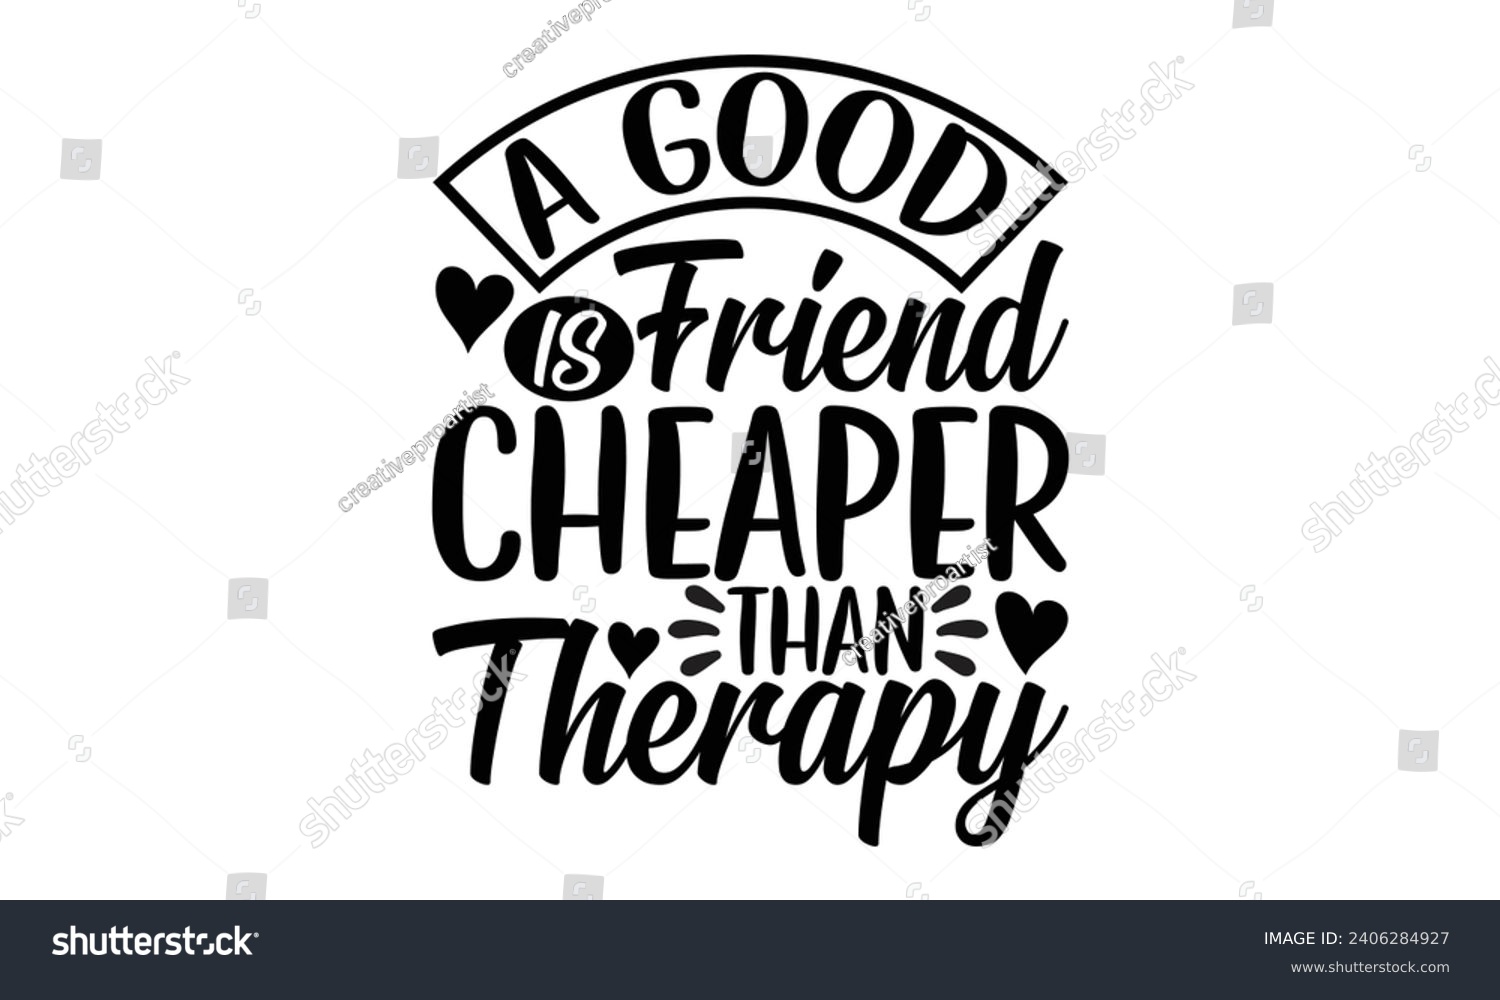 SVG of A Good Friend Is Cheaper Than Therapy- Best friends t- shirt design, Hand drawn lettering phrase, Illustration for prints on bags, posters, cards eps, Files for Cutting, Isolated on white background. svg